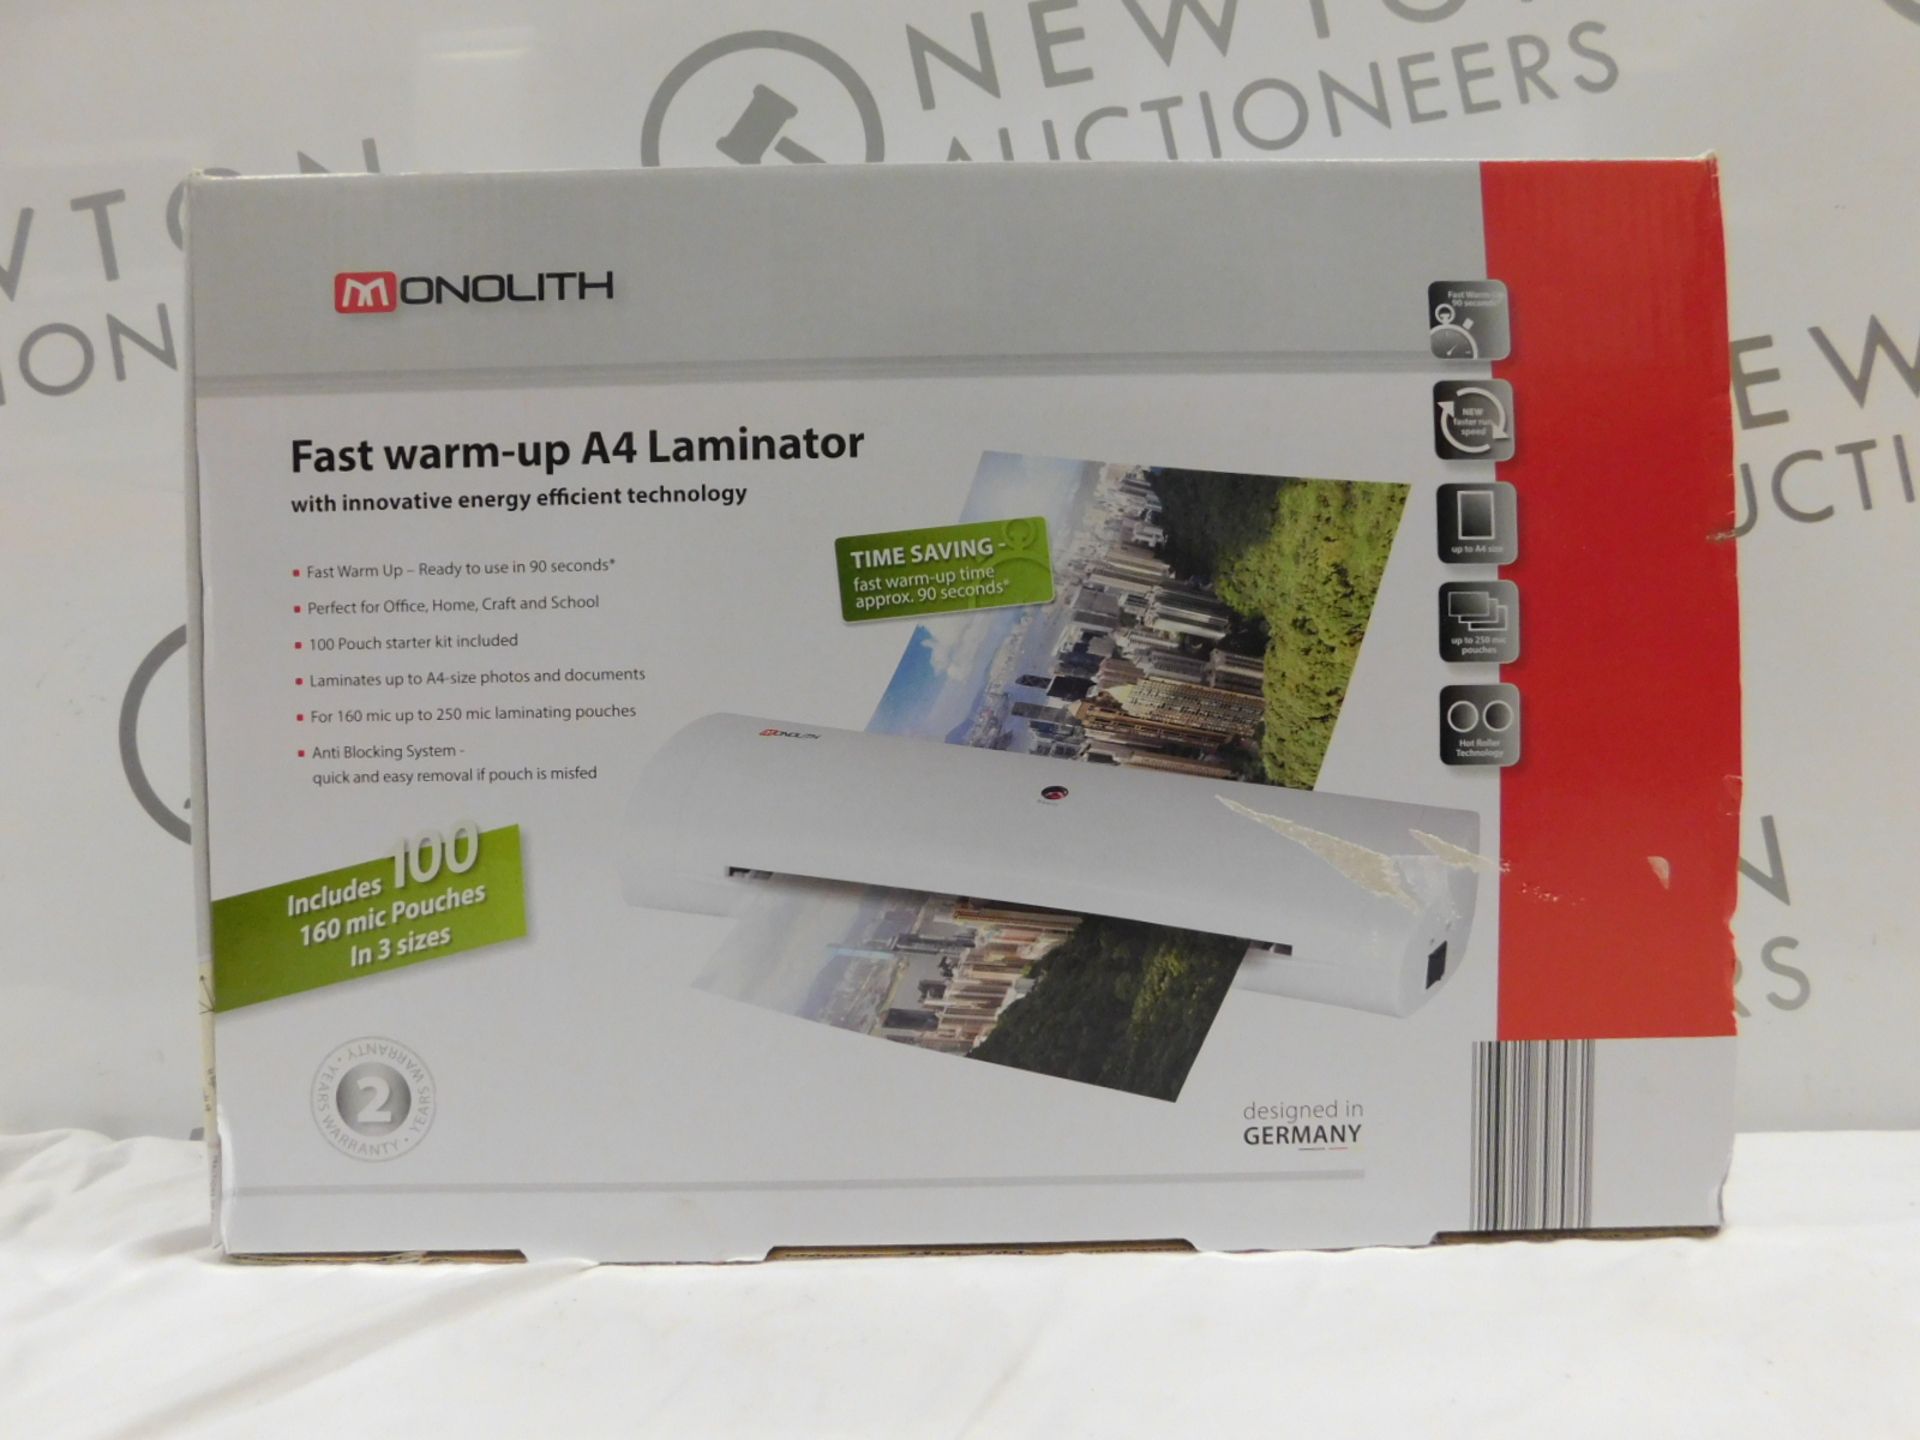 1 BOXED MONOLITH FAST WARM-UP A4 LAMINATOR RRP £32.99